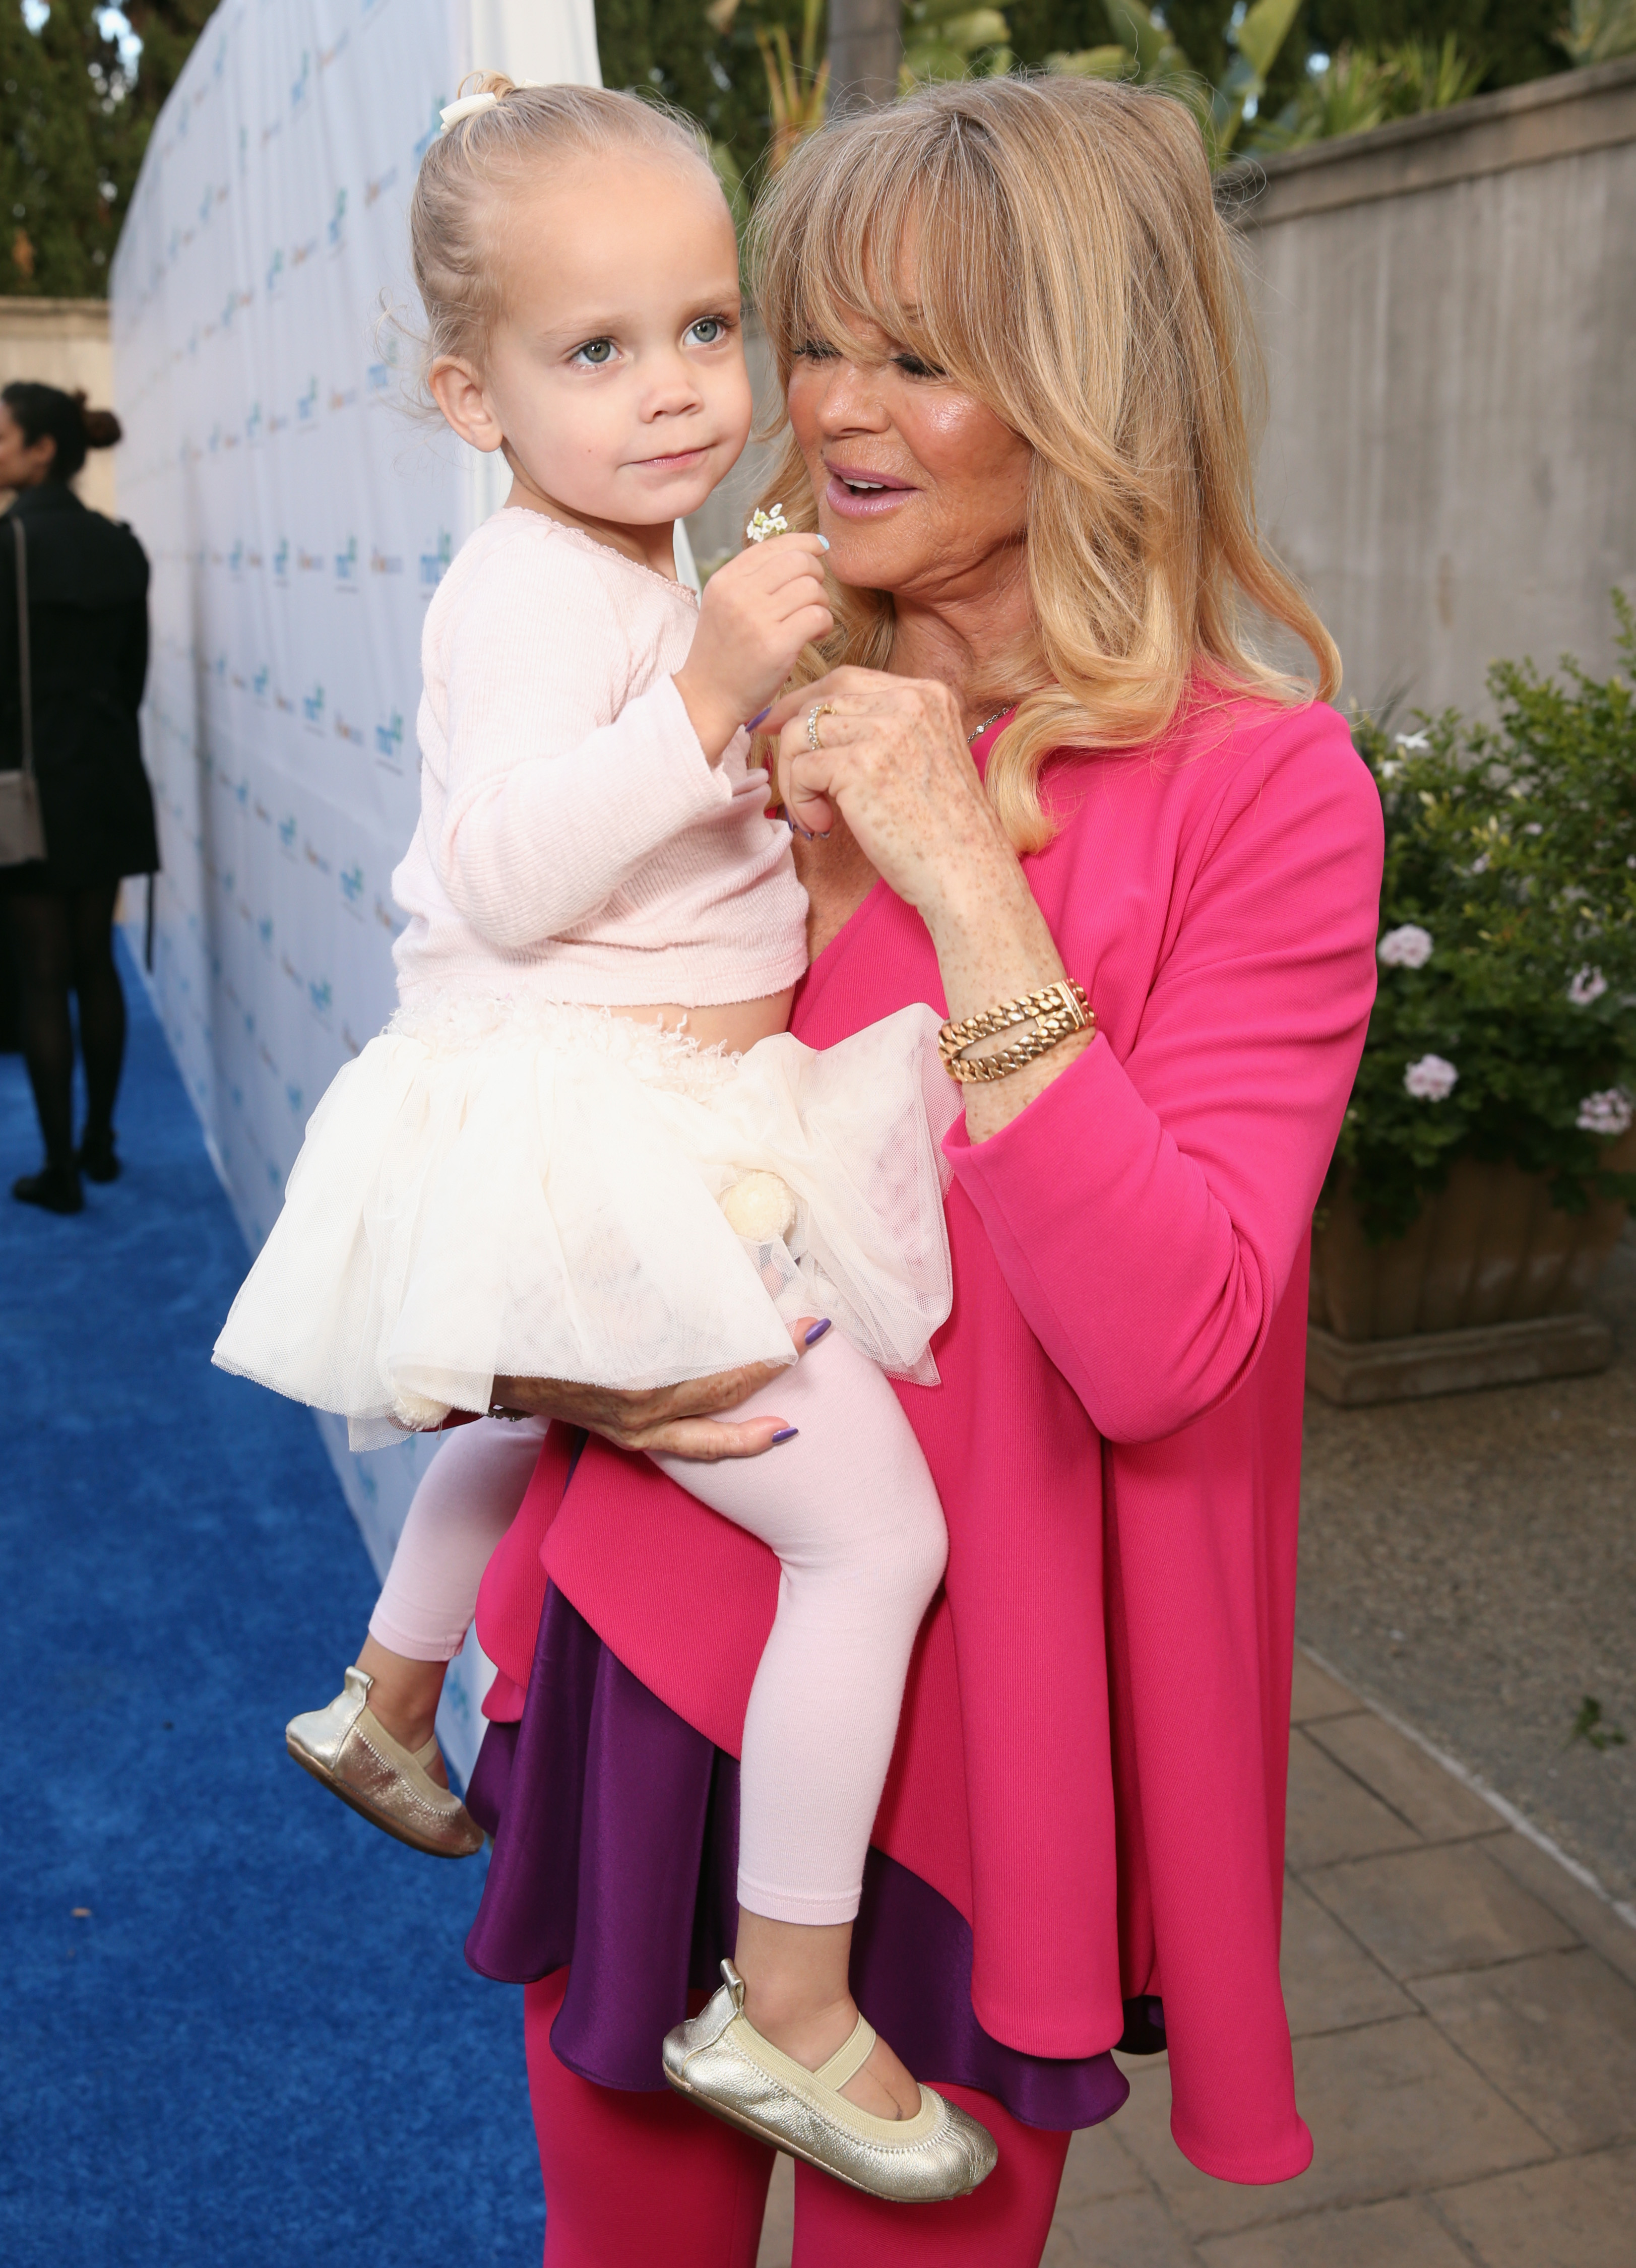 Goldie Hawn with Rio Hudson at Goldie's Love In For Kids event hosted by her in Beverly Hills, California on May 6, 2016. | Source: Getty Images